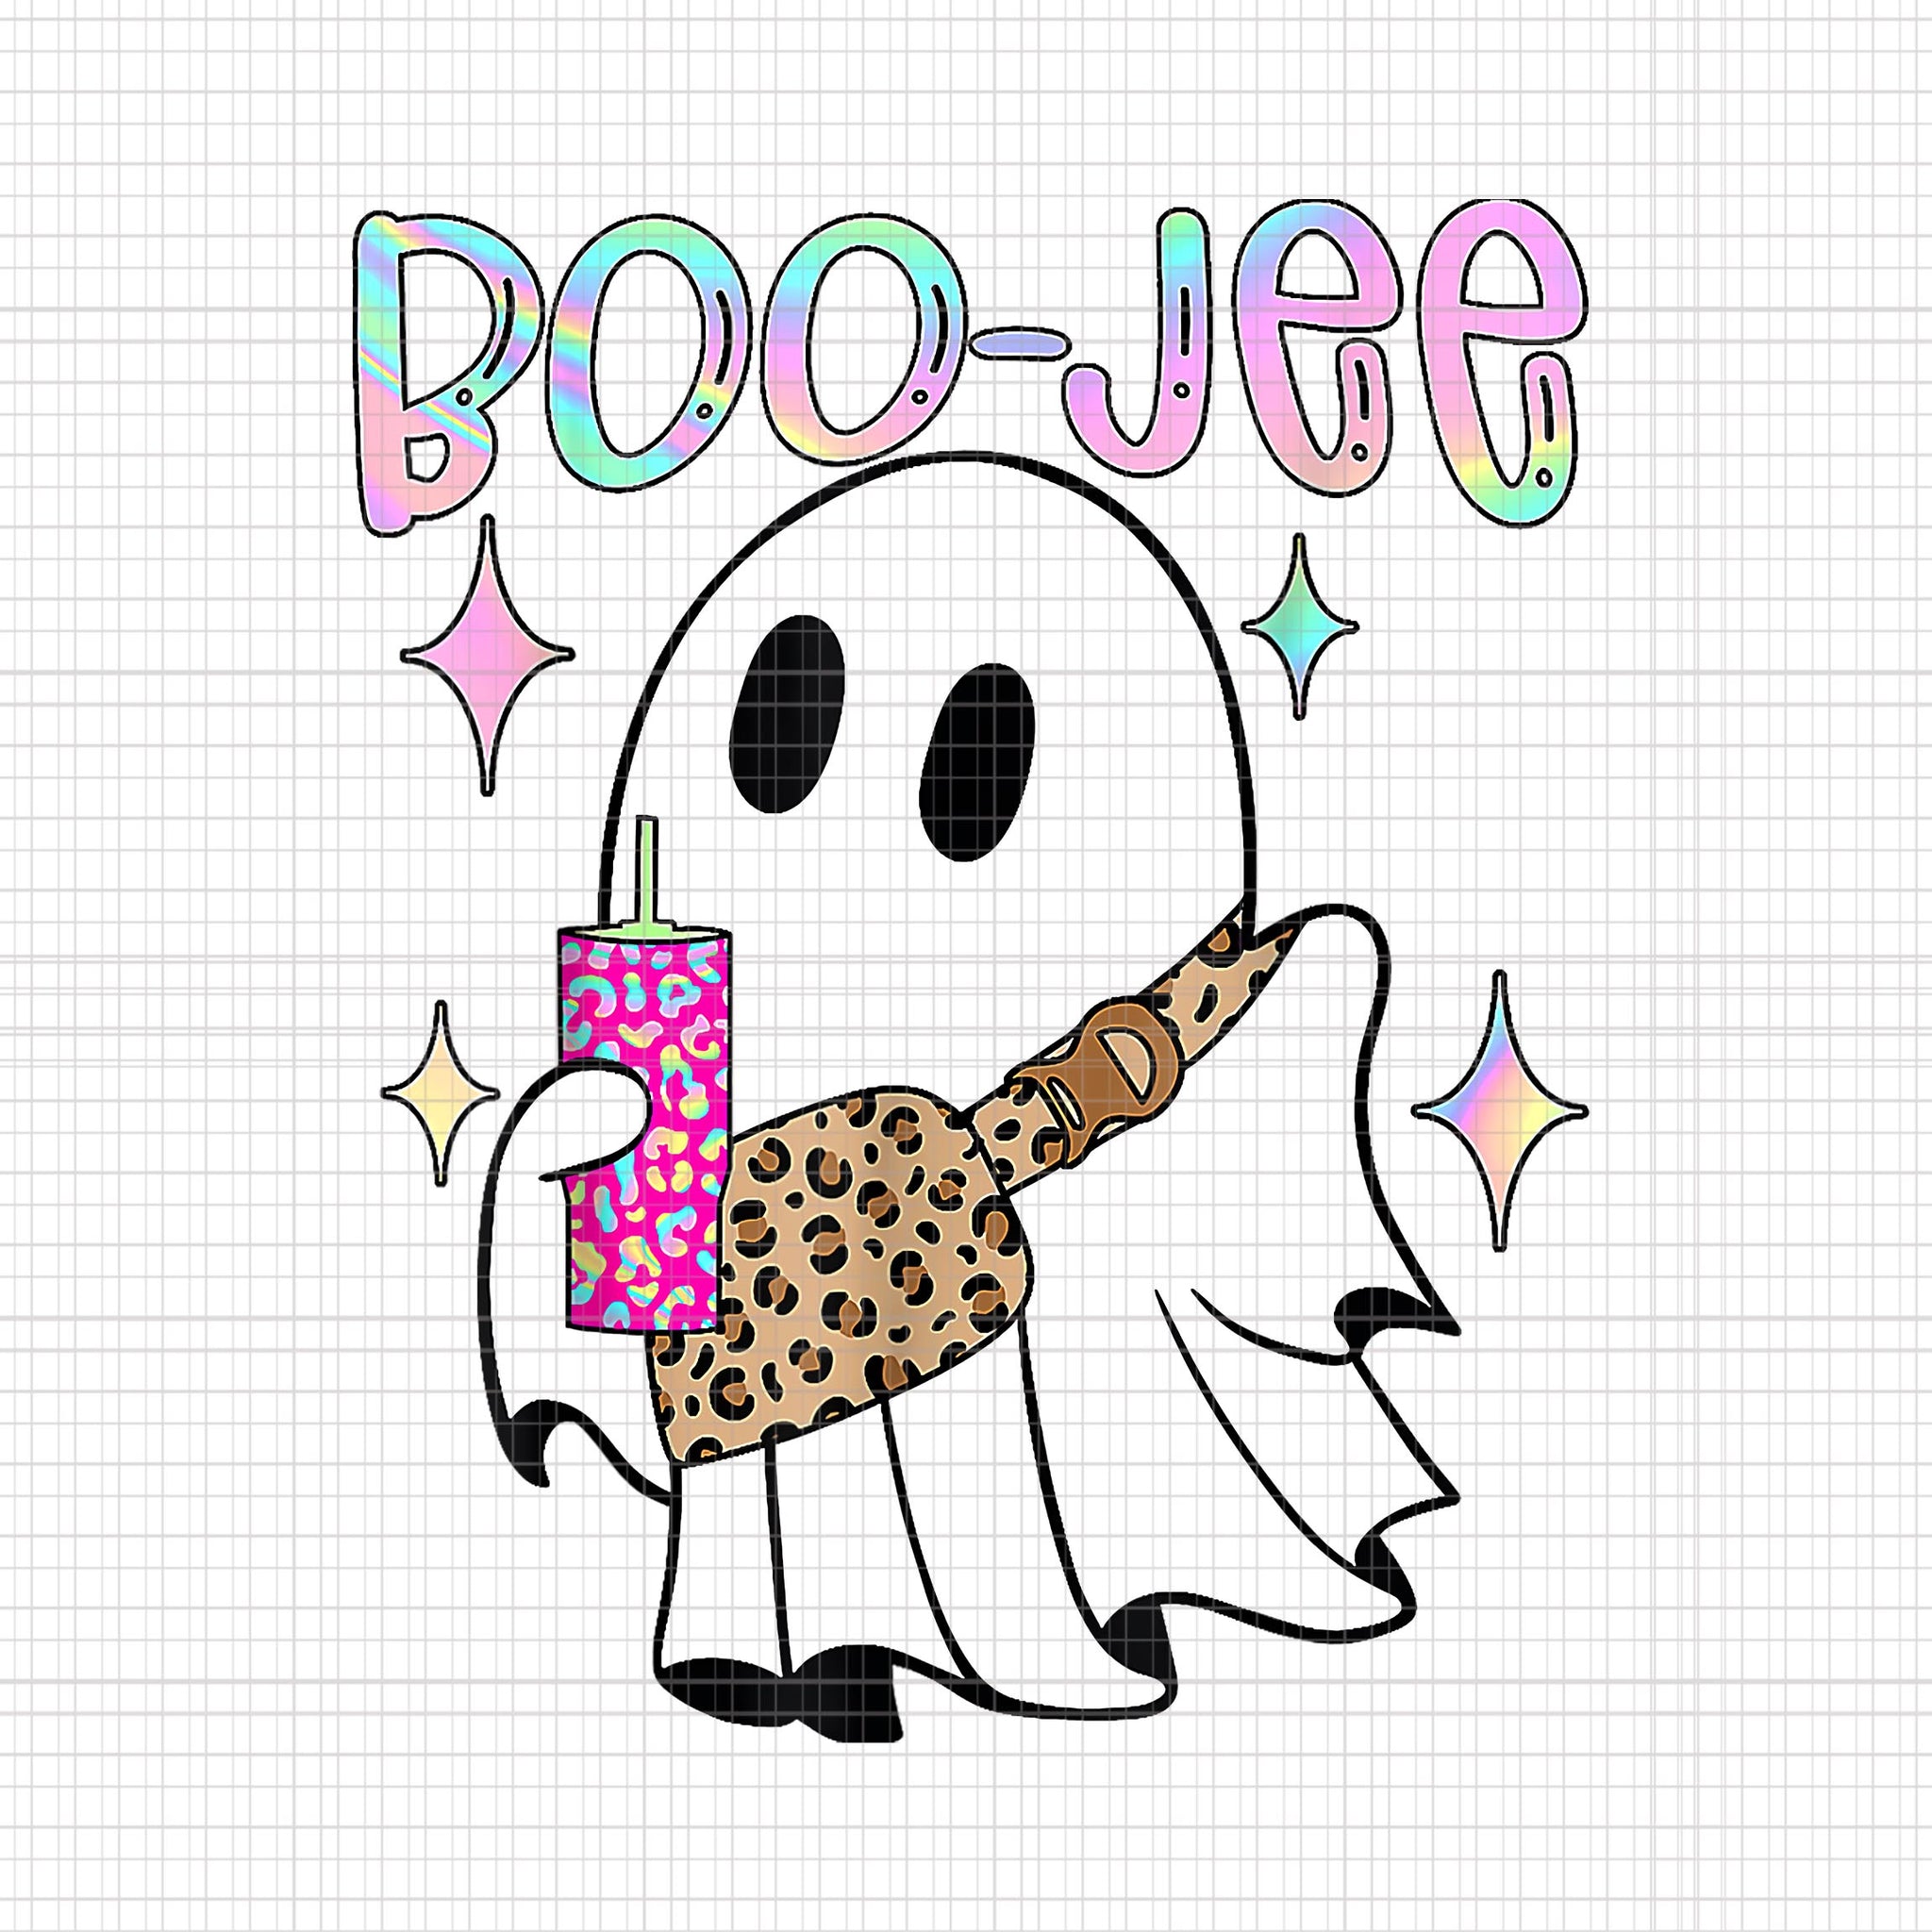 Boo Ghost Spooky Halloween Png, Boujee Boo Jee Png, Boo Jee Png, Boo Halloween Png, Boujee Halloween Png, Boo Ghost Png